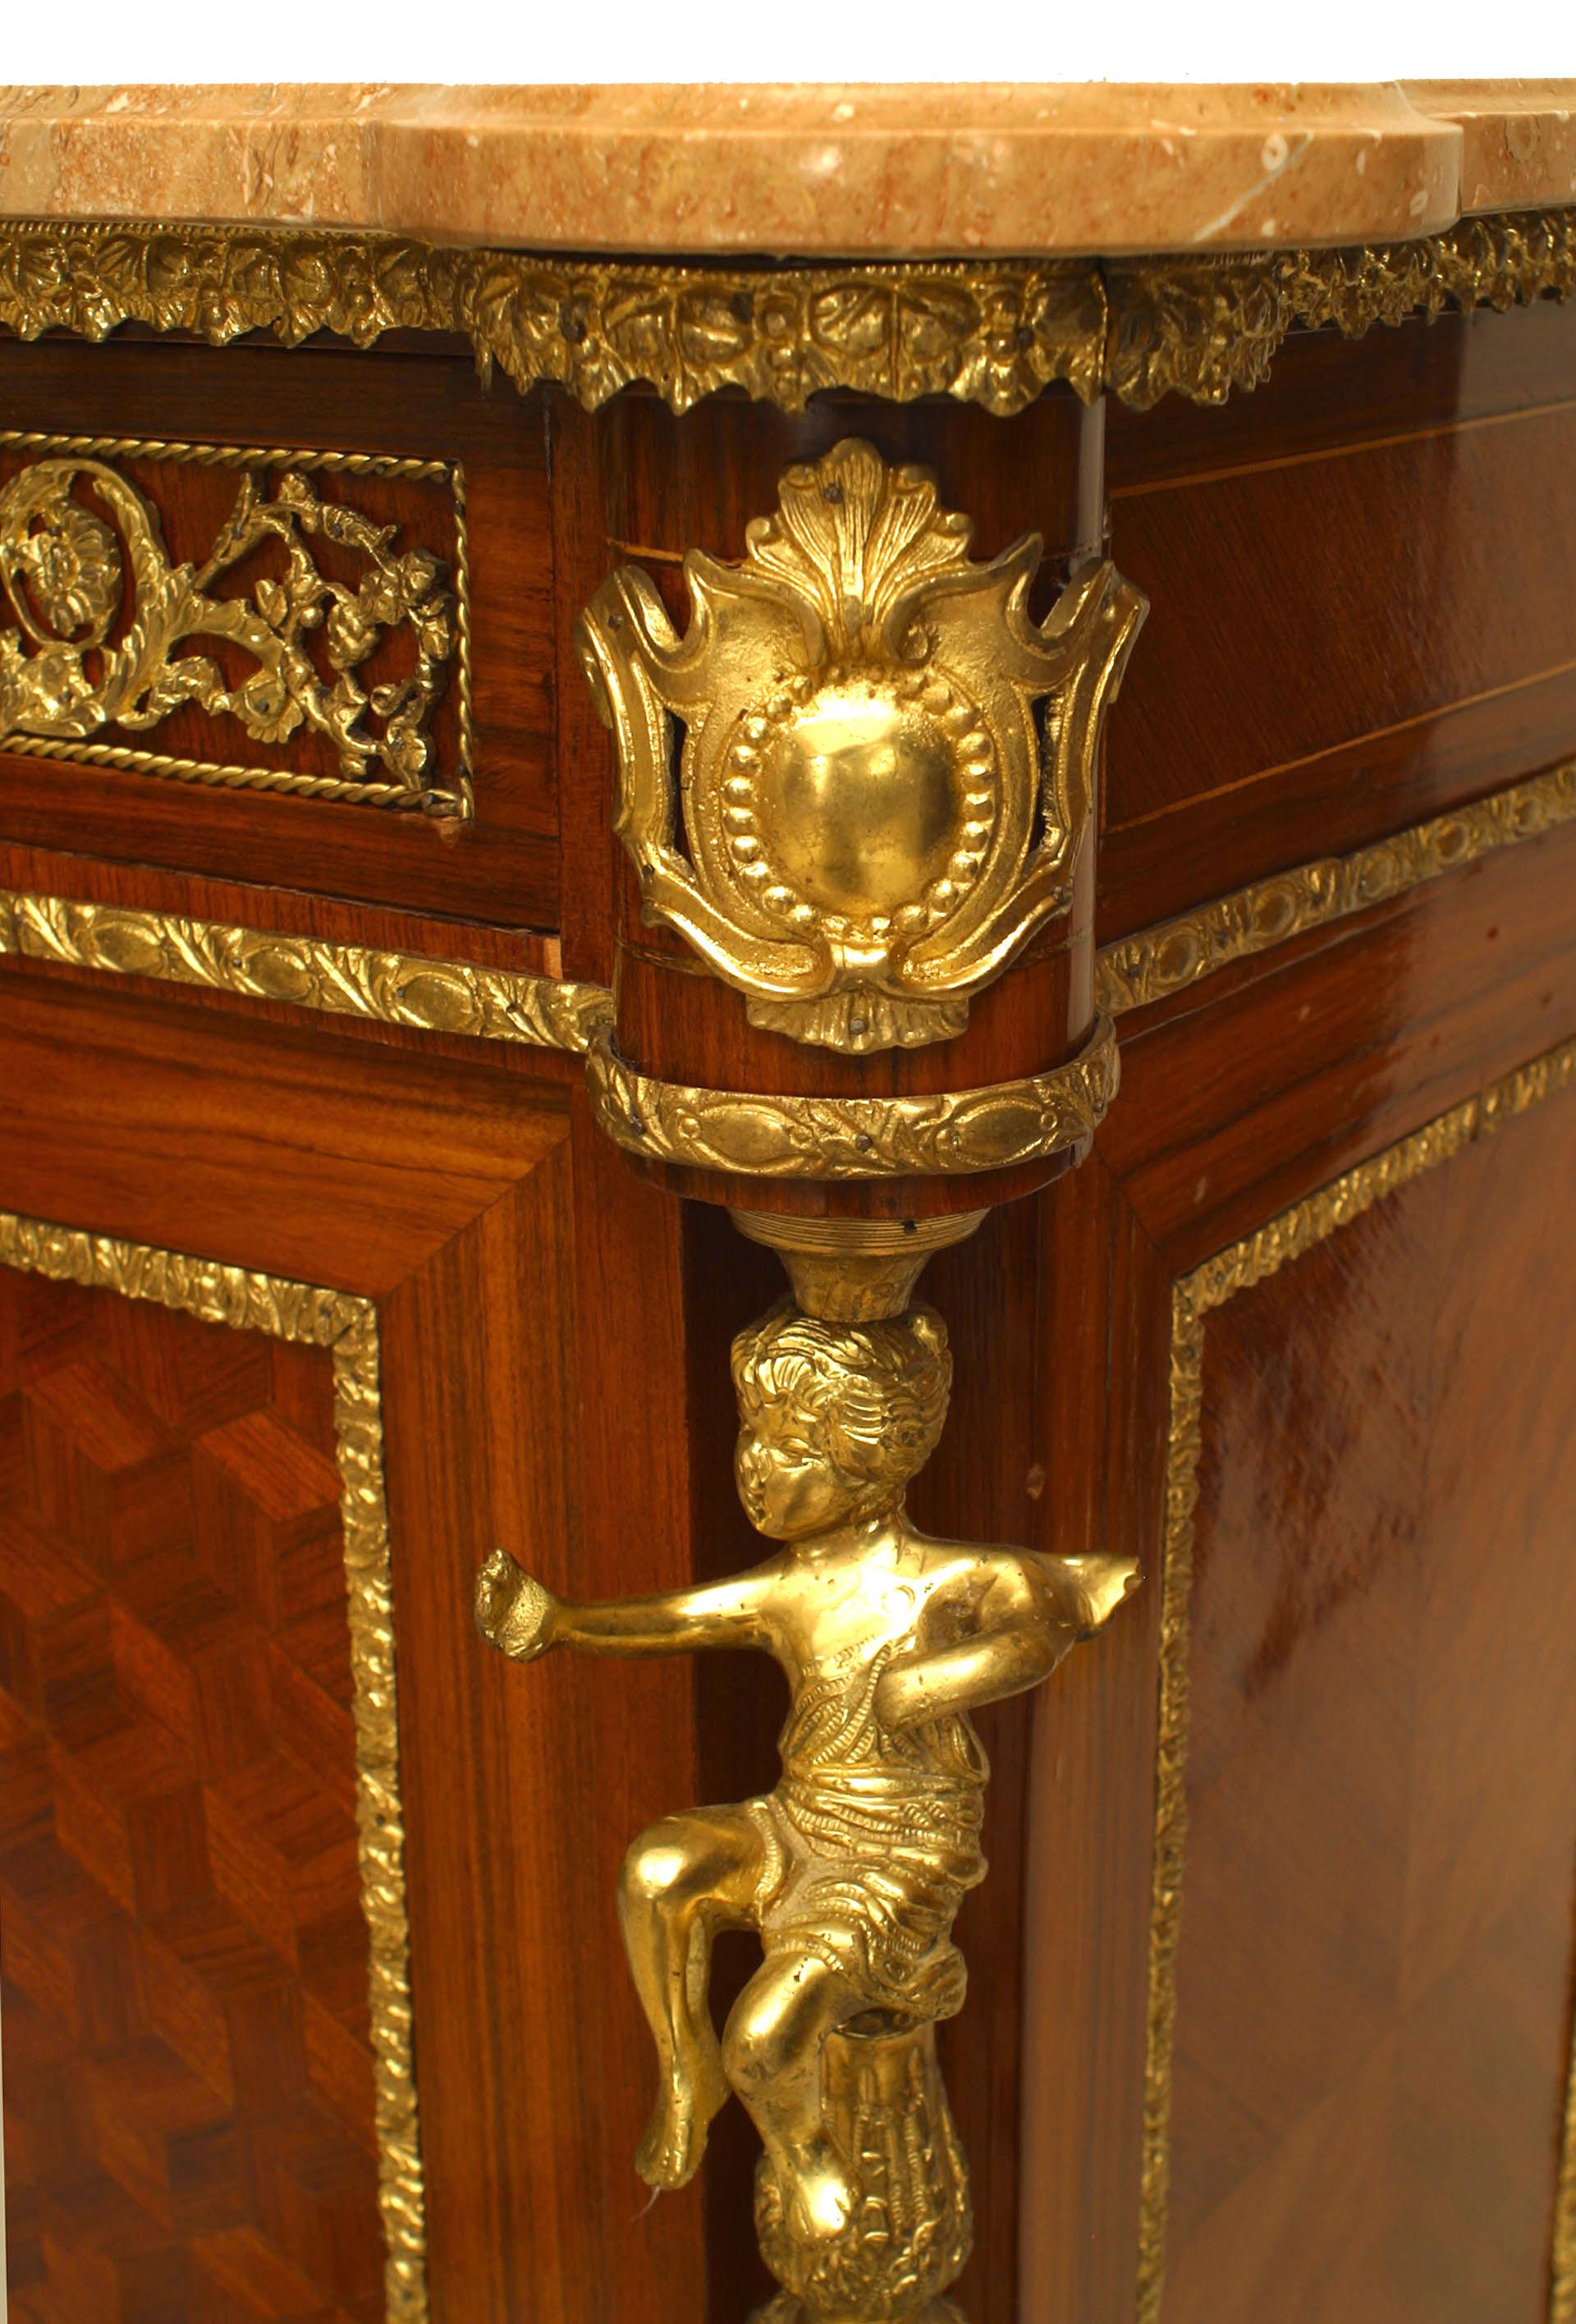 20th Century French Victorian Fruitwood and Parquetry Chest with Cupid Figures and Marble Top For Sale